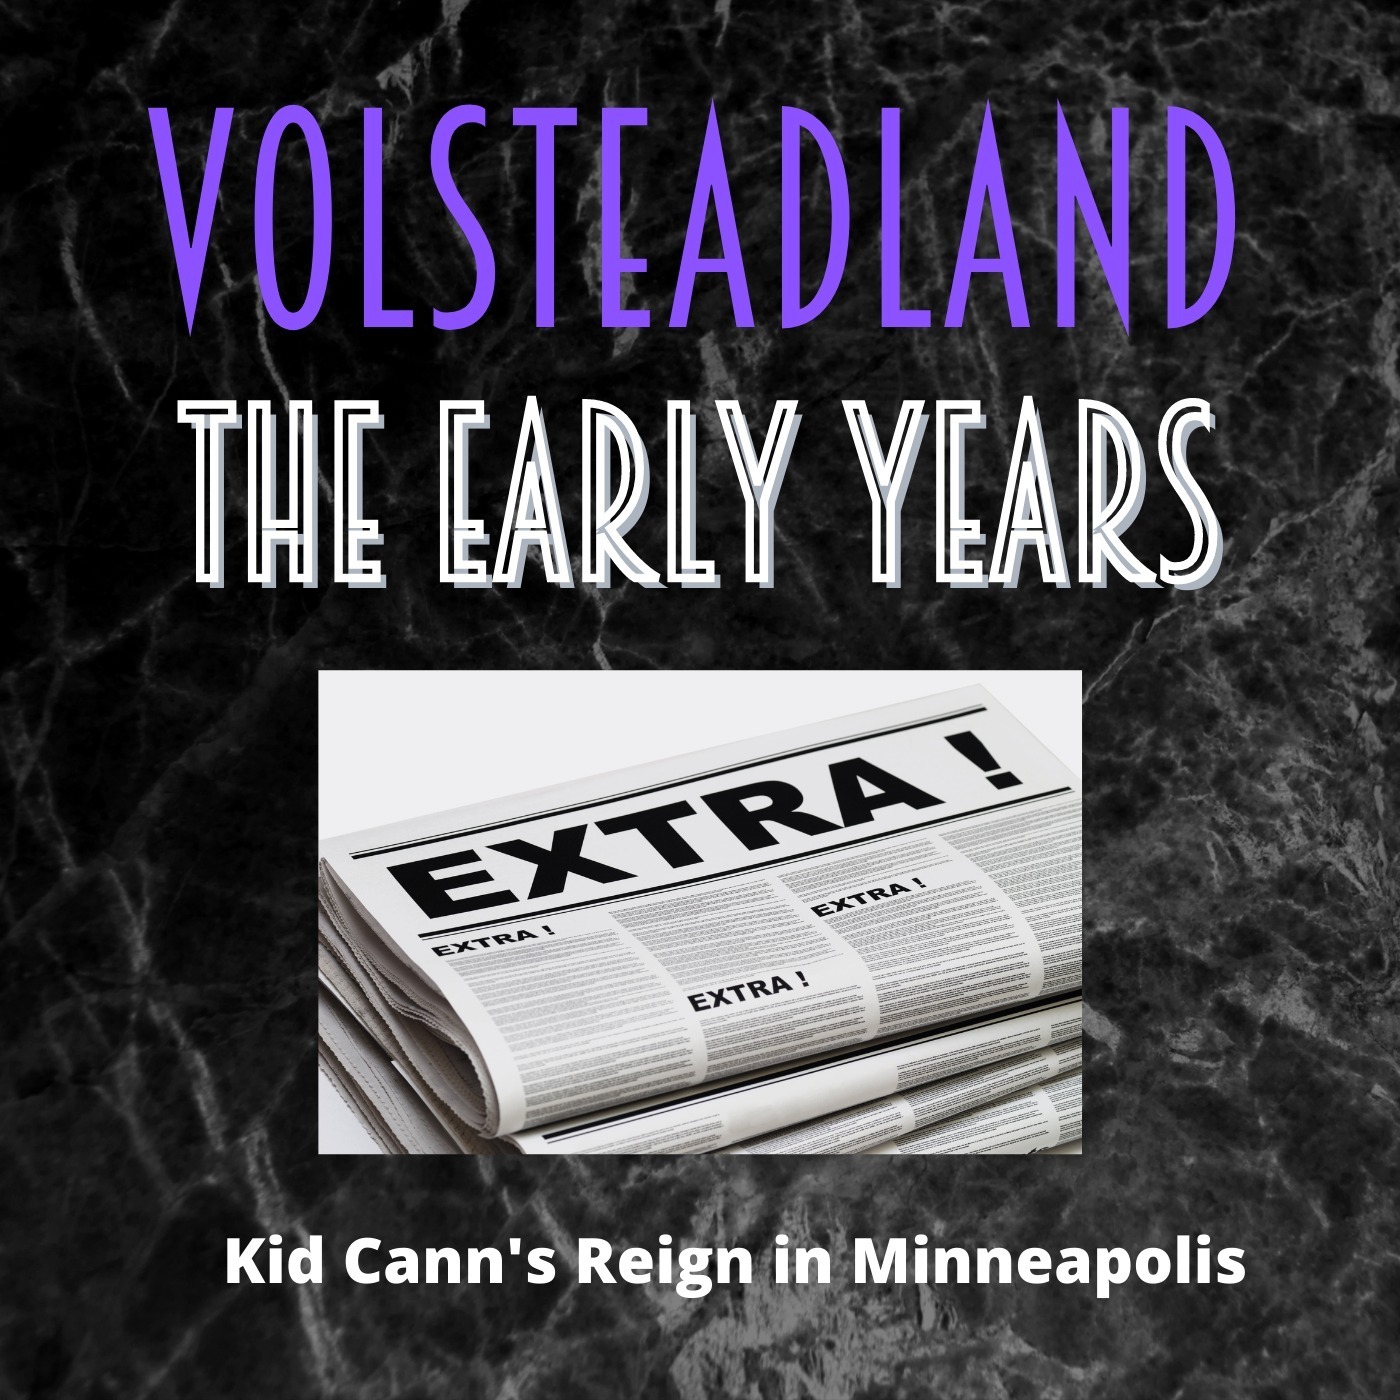 Volsteadland: The Early Years